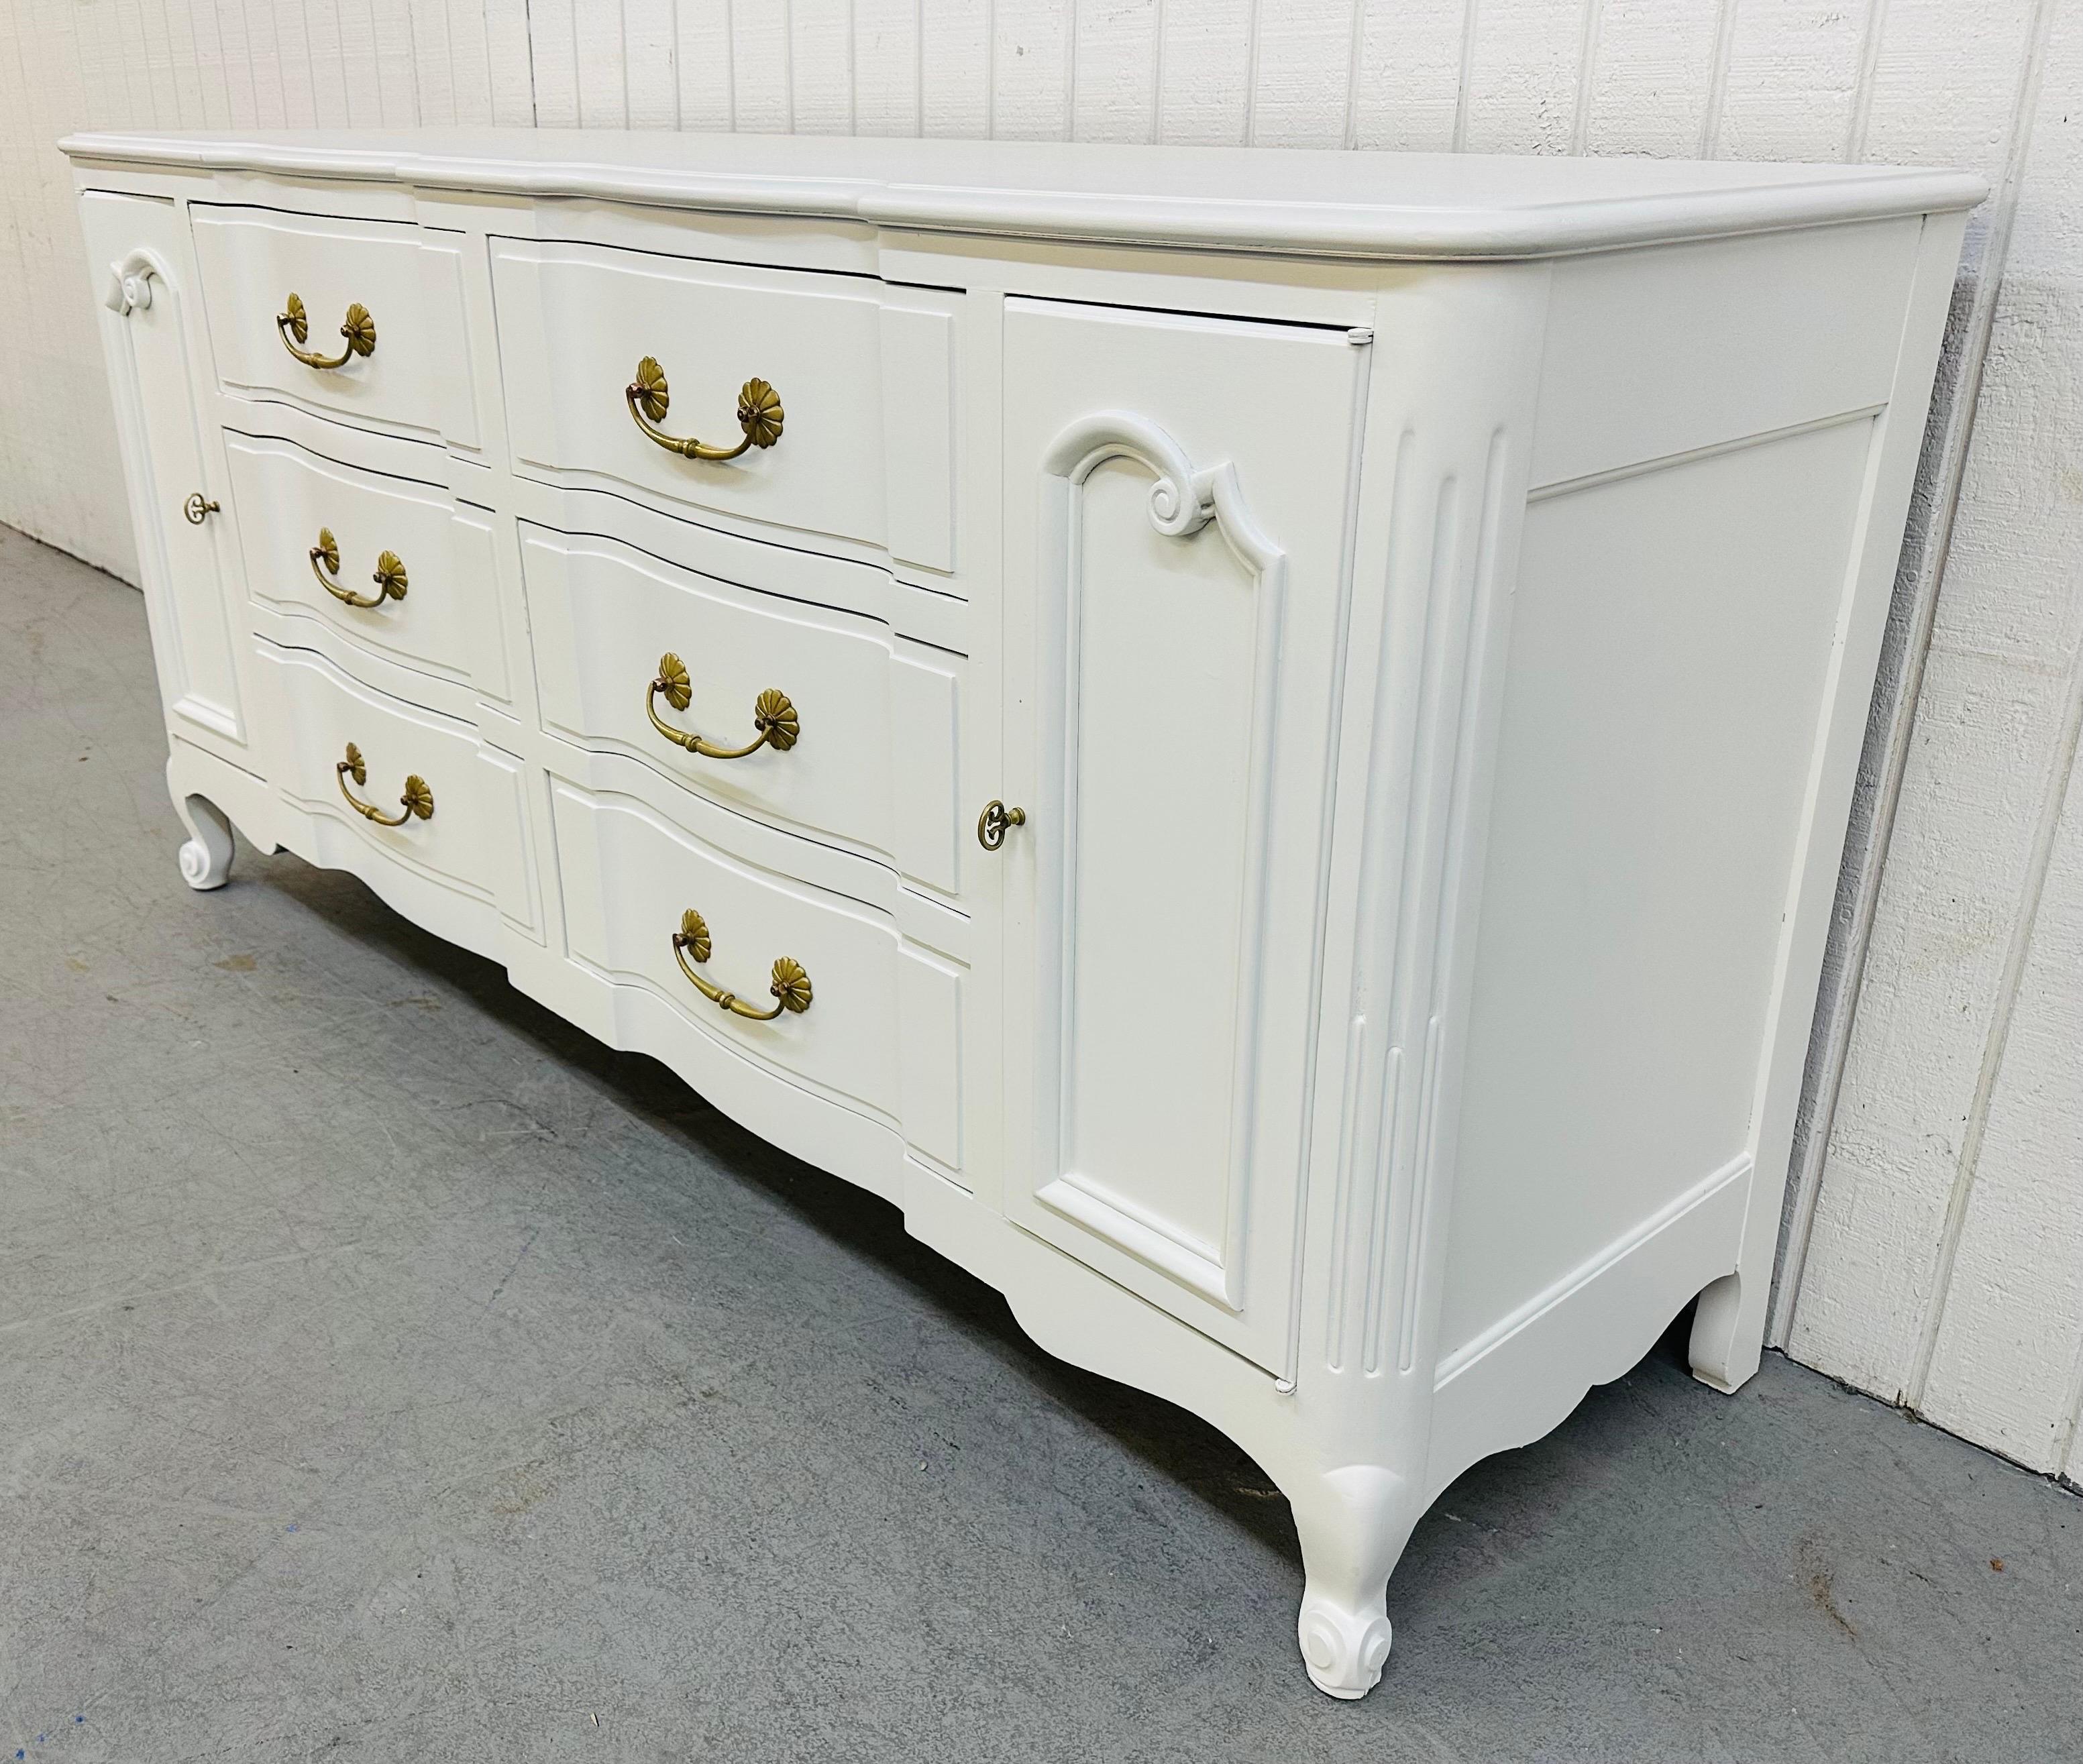 This listing is for a Vintage John Stuart French Provincial Painted White Dresser. Featuring six large center drawers, six smaller drawers hidden behind doors, original brass hardware, exceptional quality by John Stuart, and a newly painted finish.